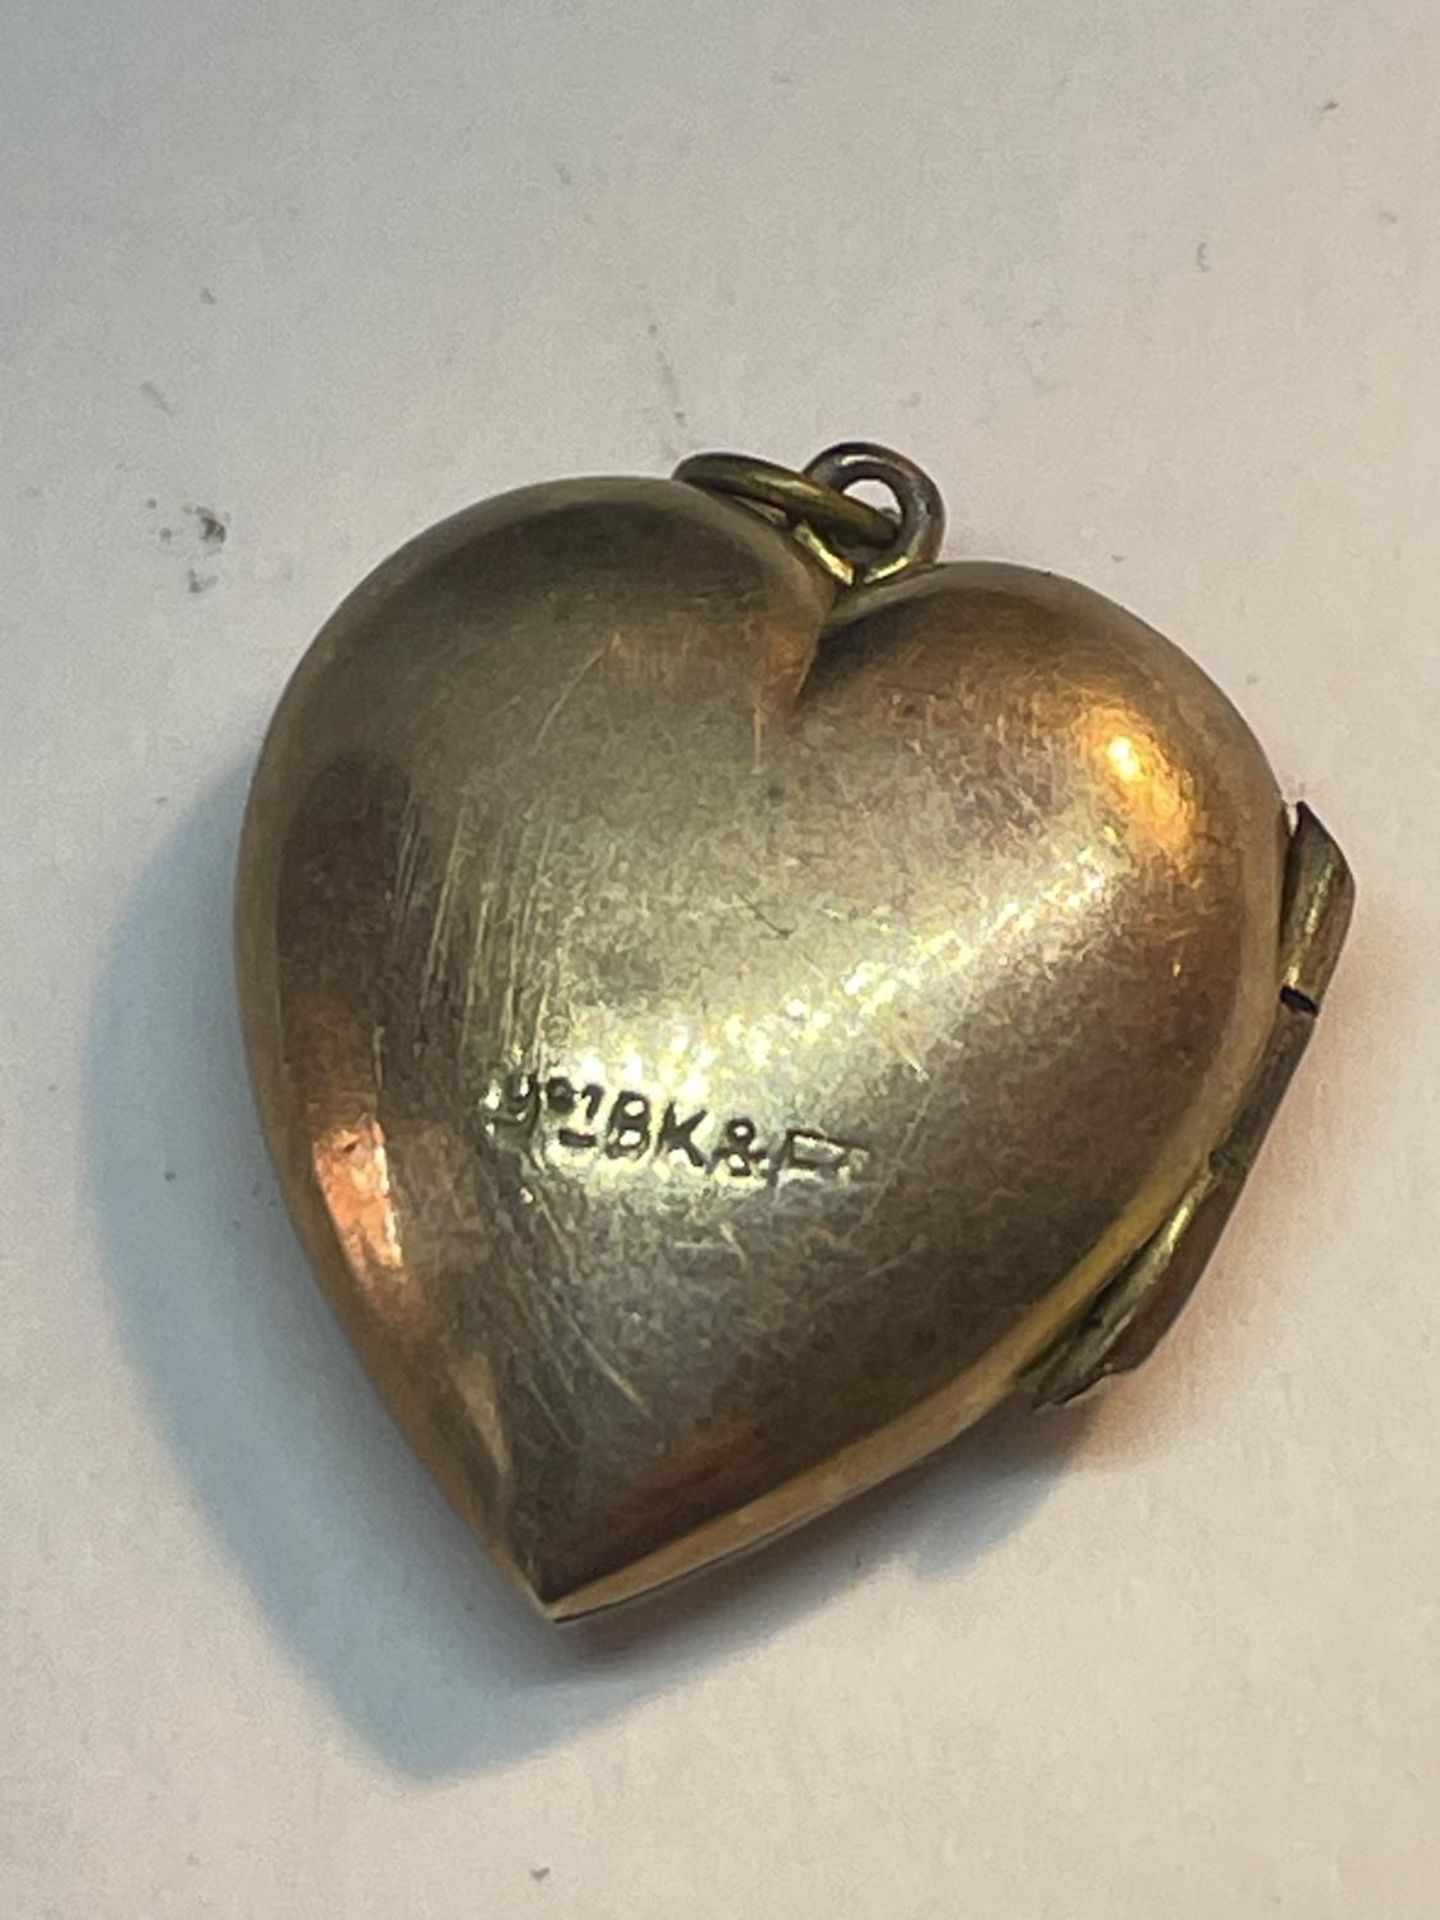 A 9 CARAT GOLD HEART LOCKET WITH VINTAGE PHOTOGRAPHS GROSS WEIGHT 3.28 GRAMS - Image 2 of 4